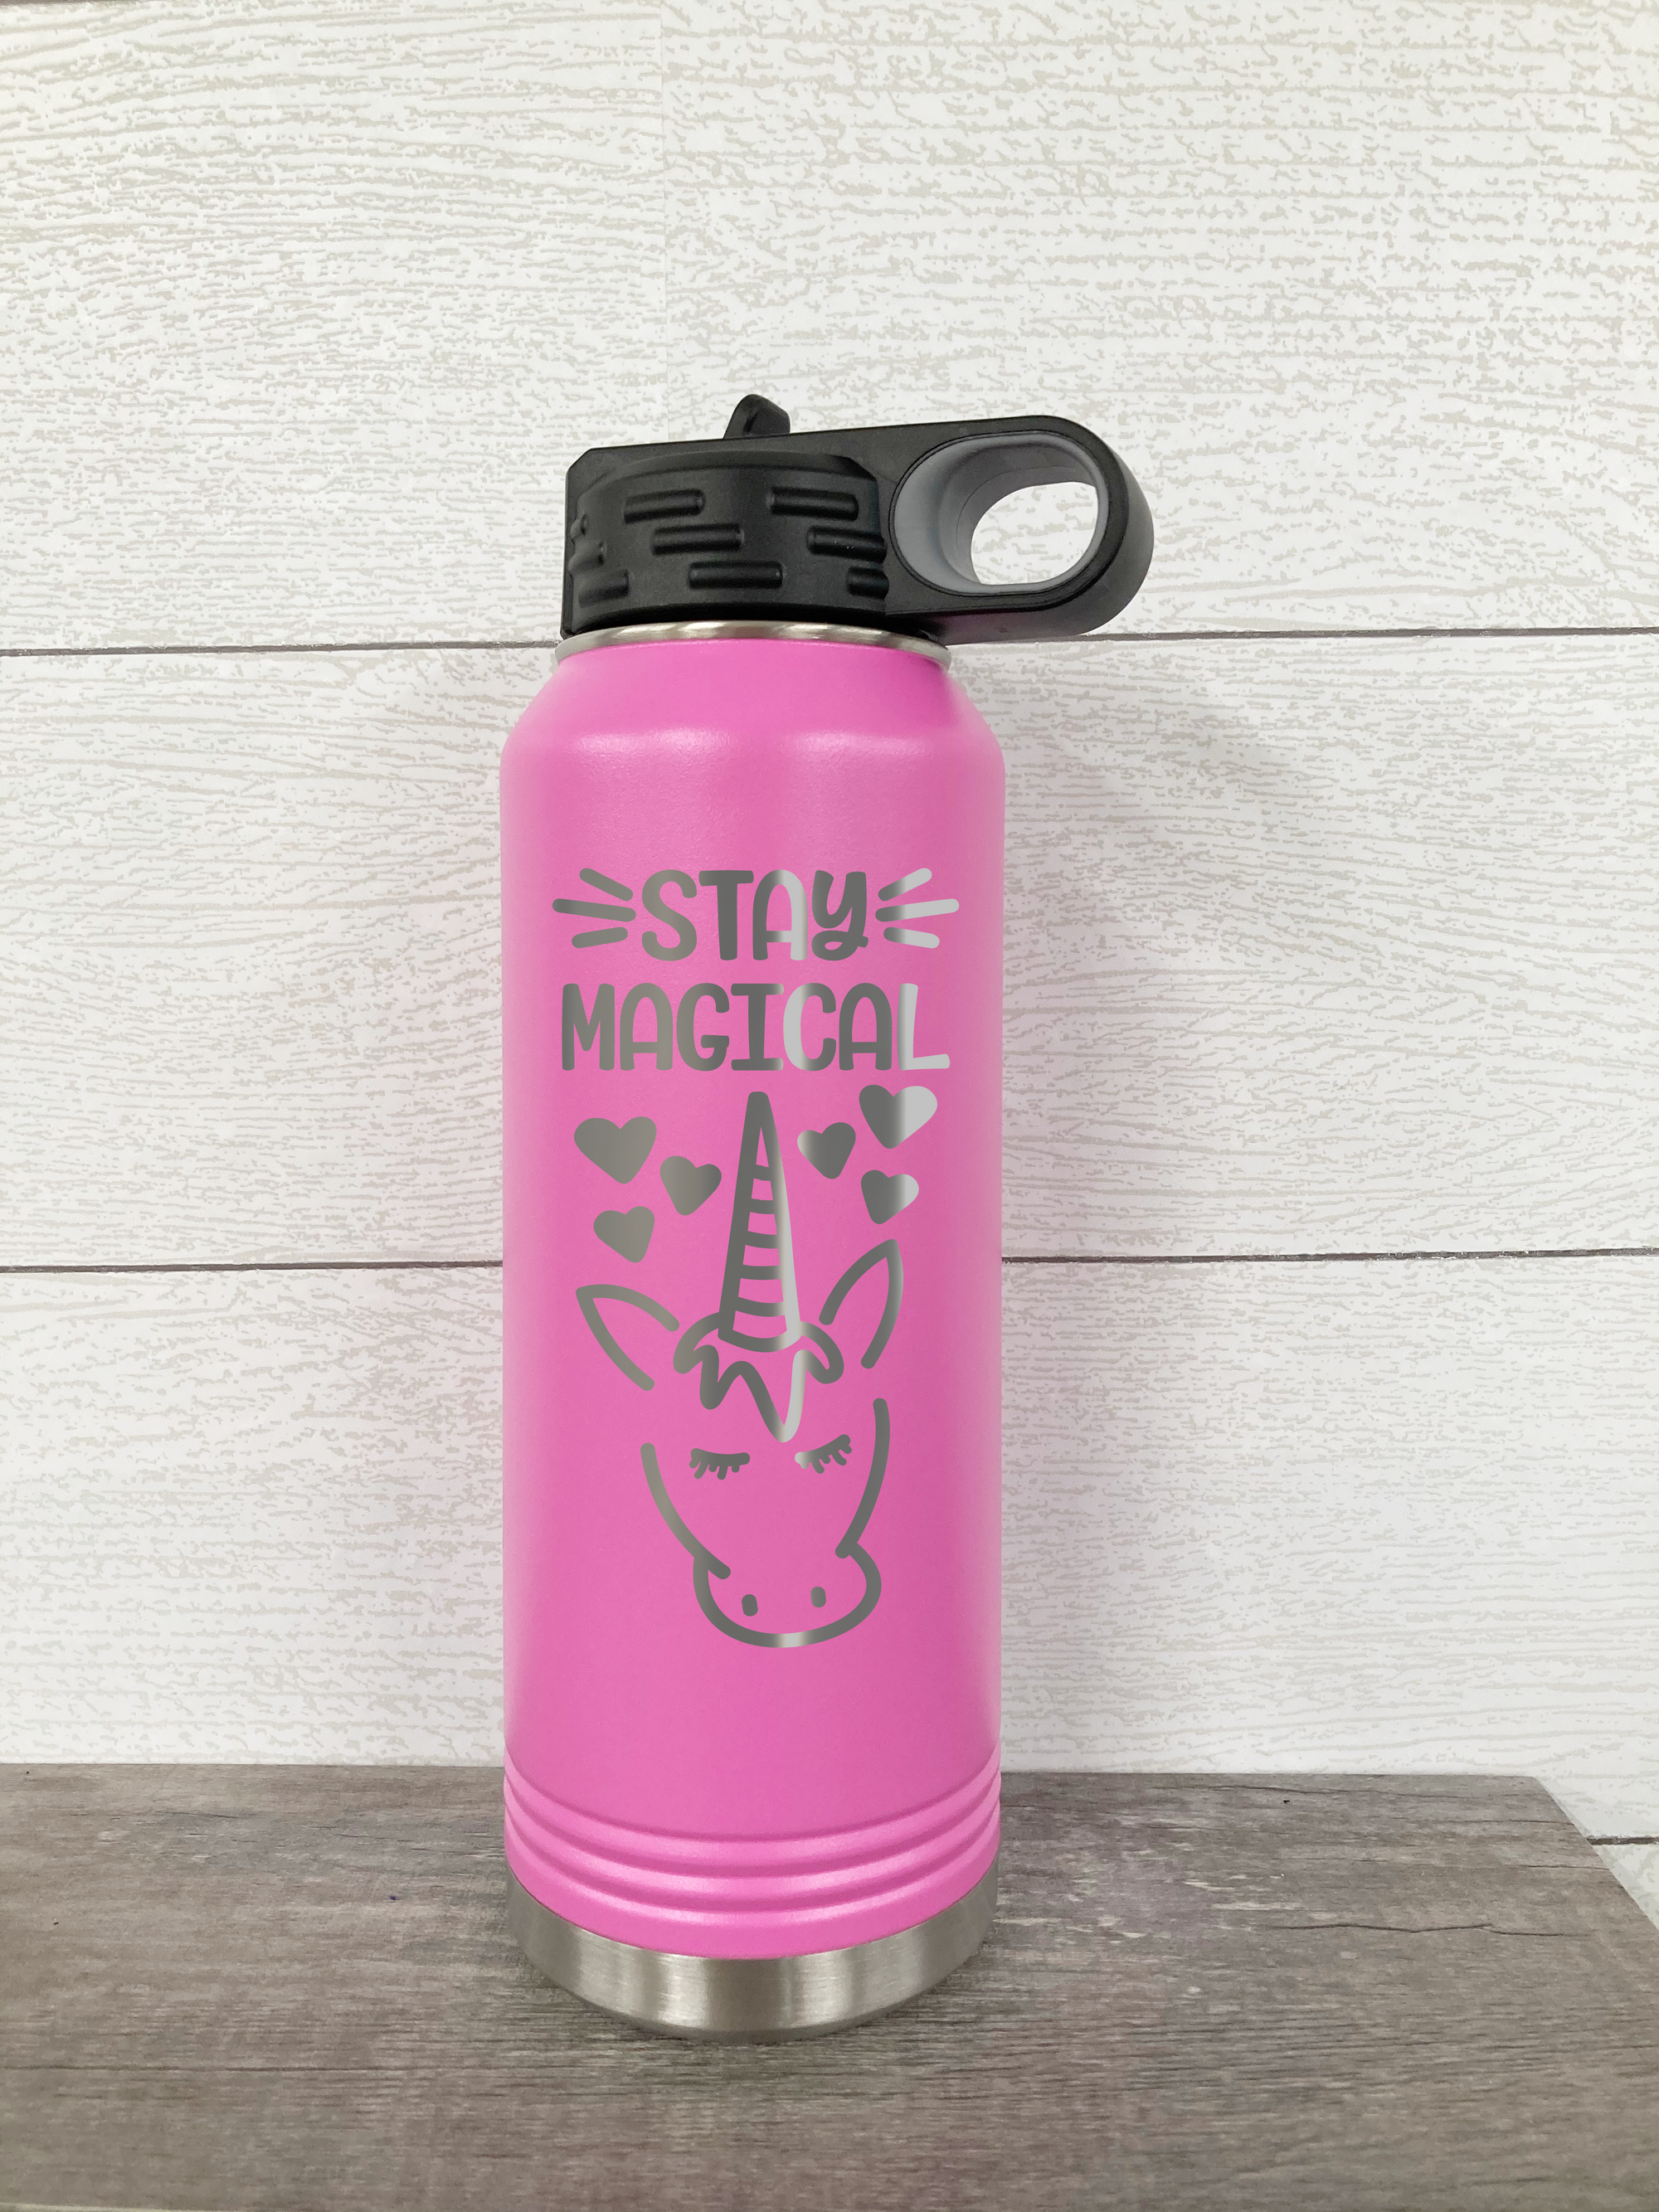 https://cdn.shopify.com/s/files/1/2109/3813/products/staymagicalwaterbottle_2000x.png?v=1625687708